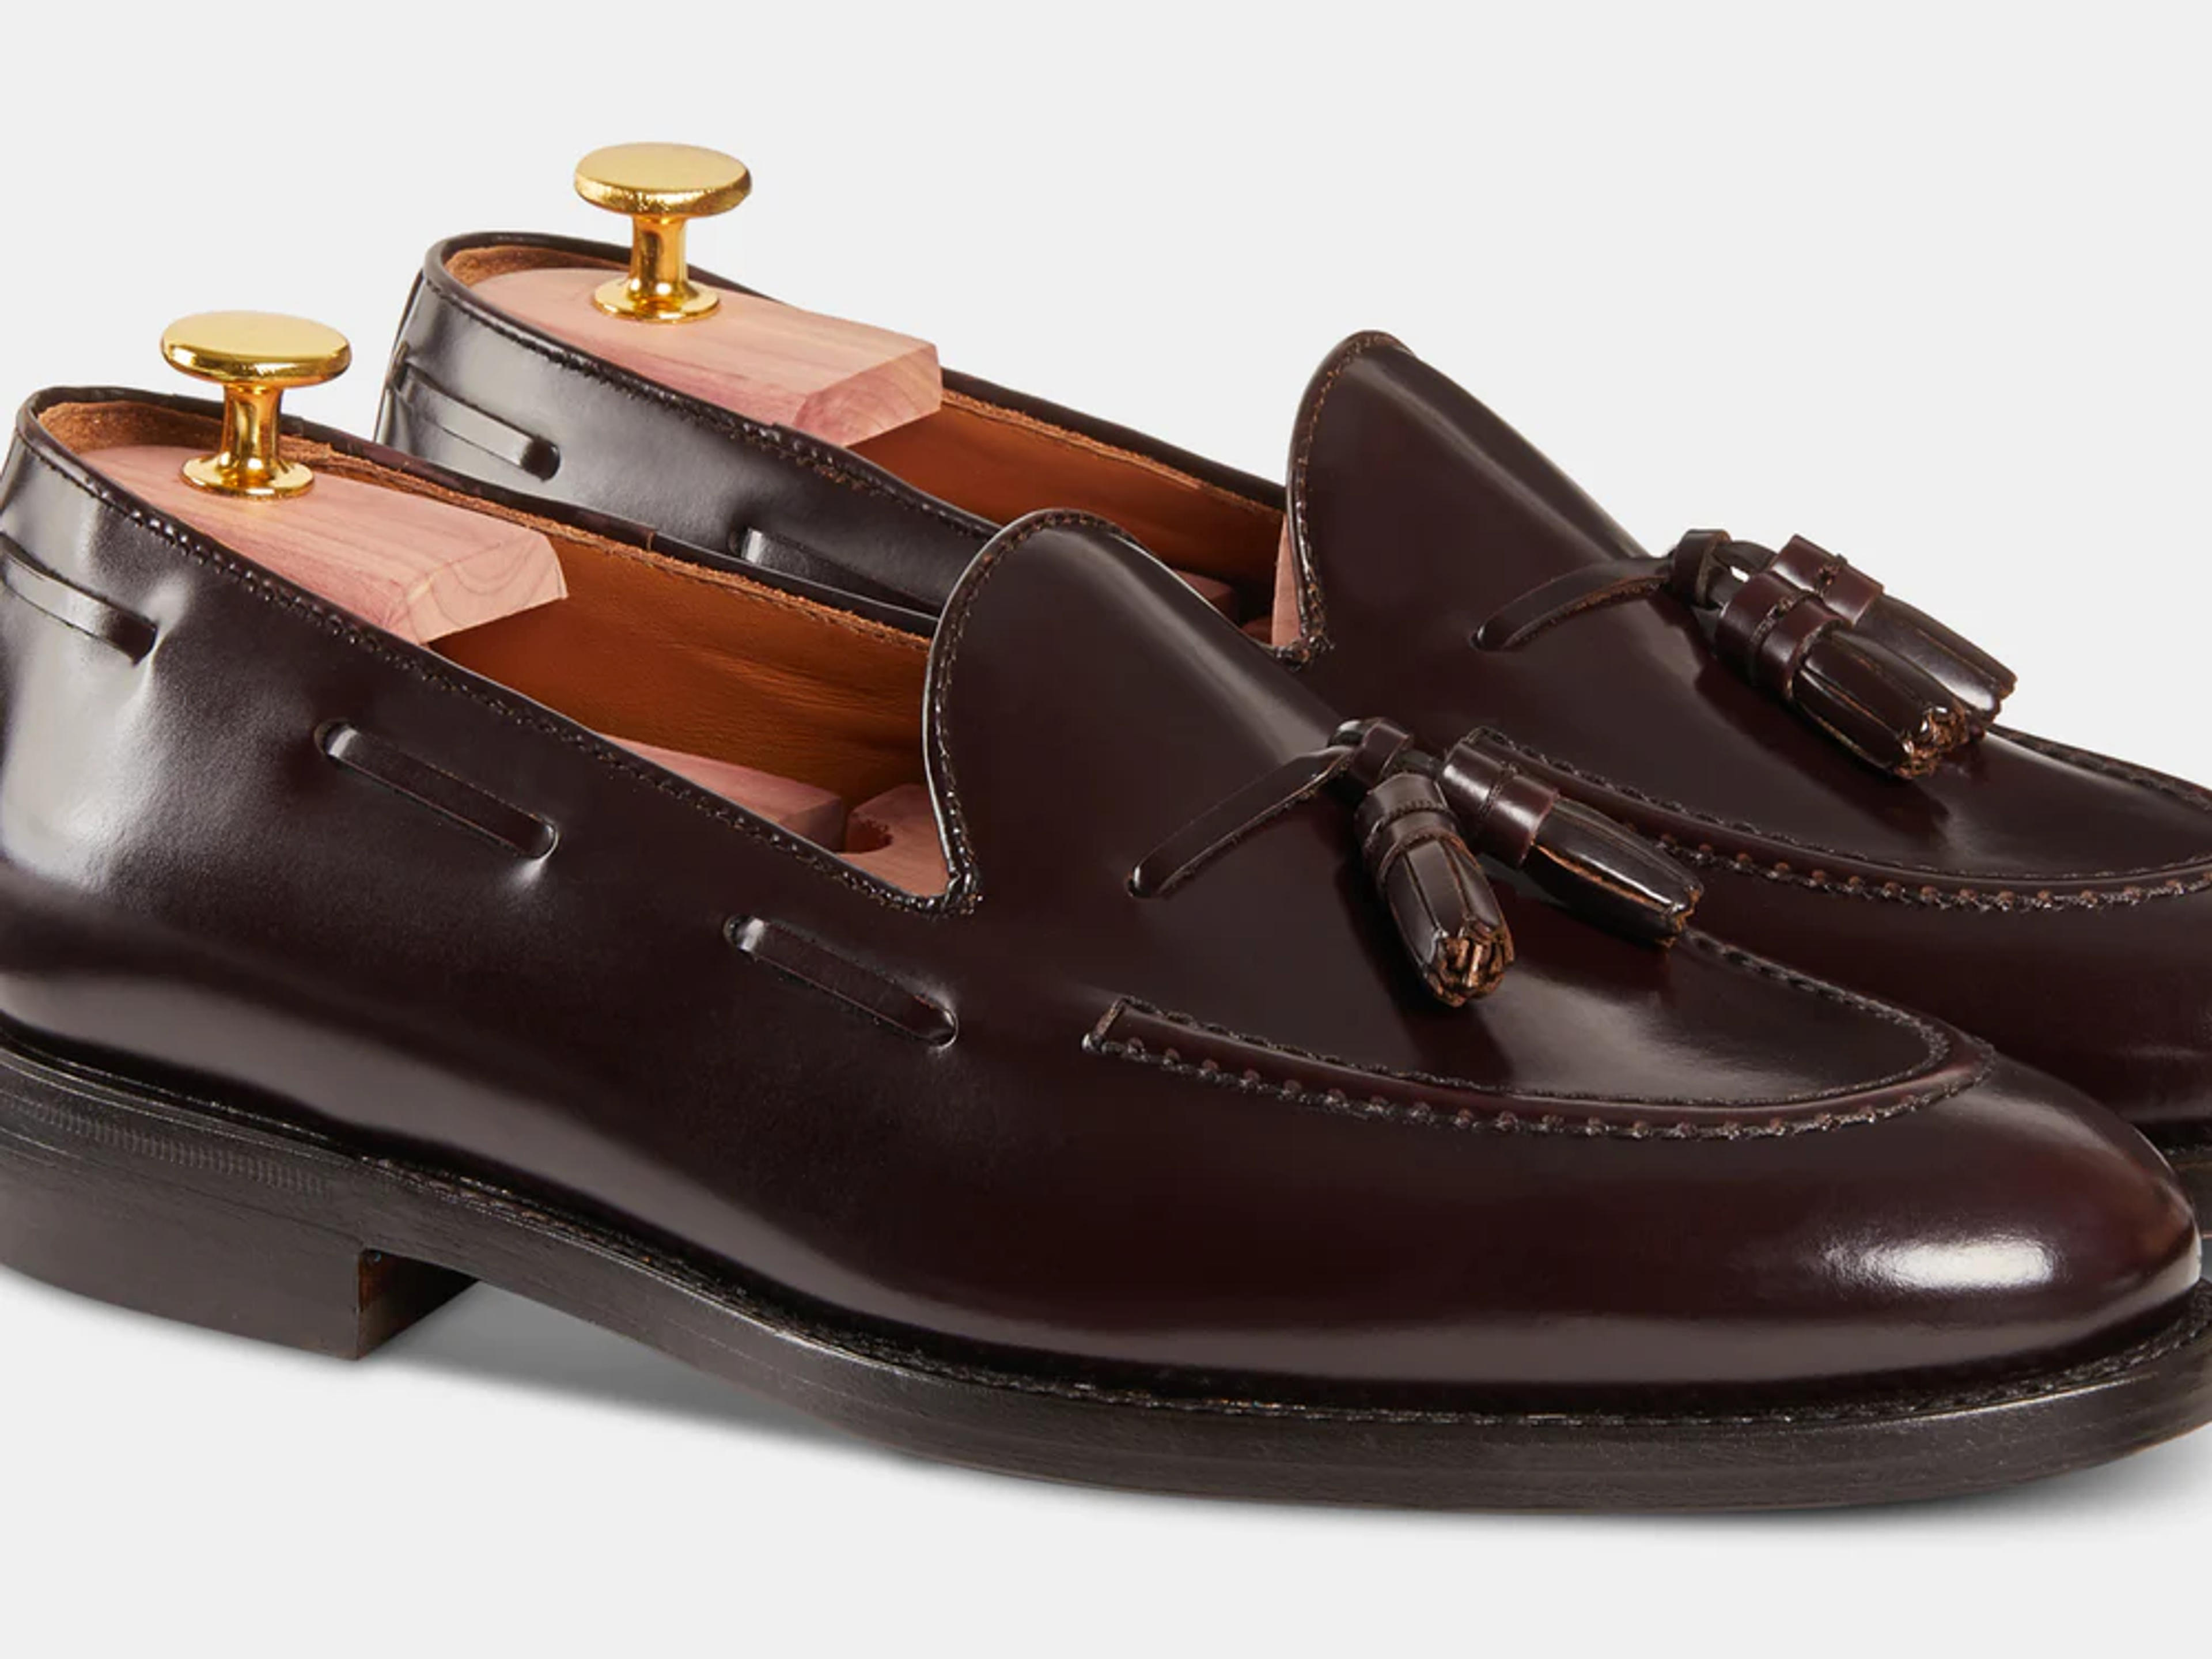 Men’s brown leather Loafers with Tassels